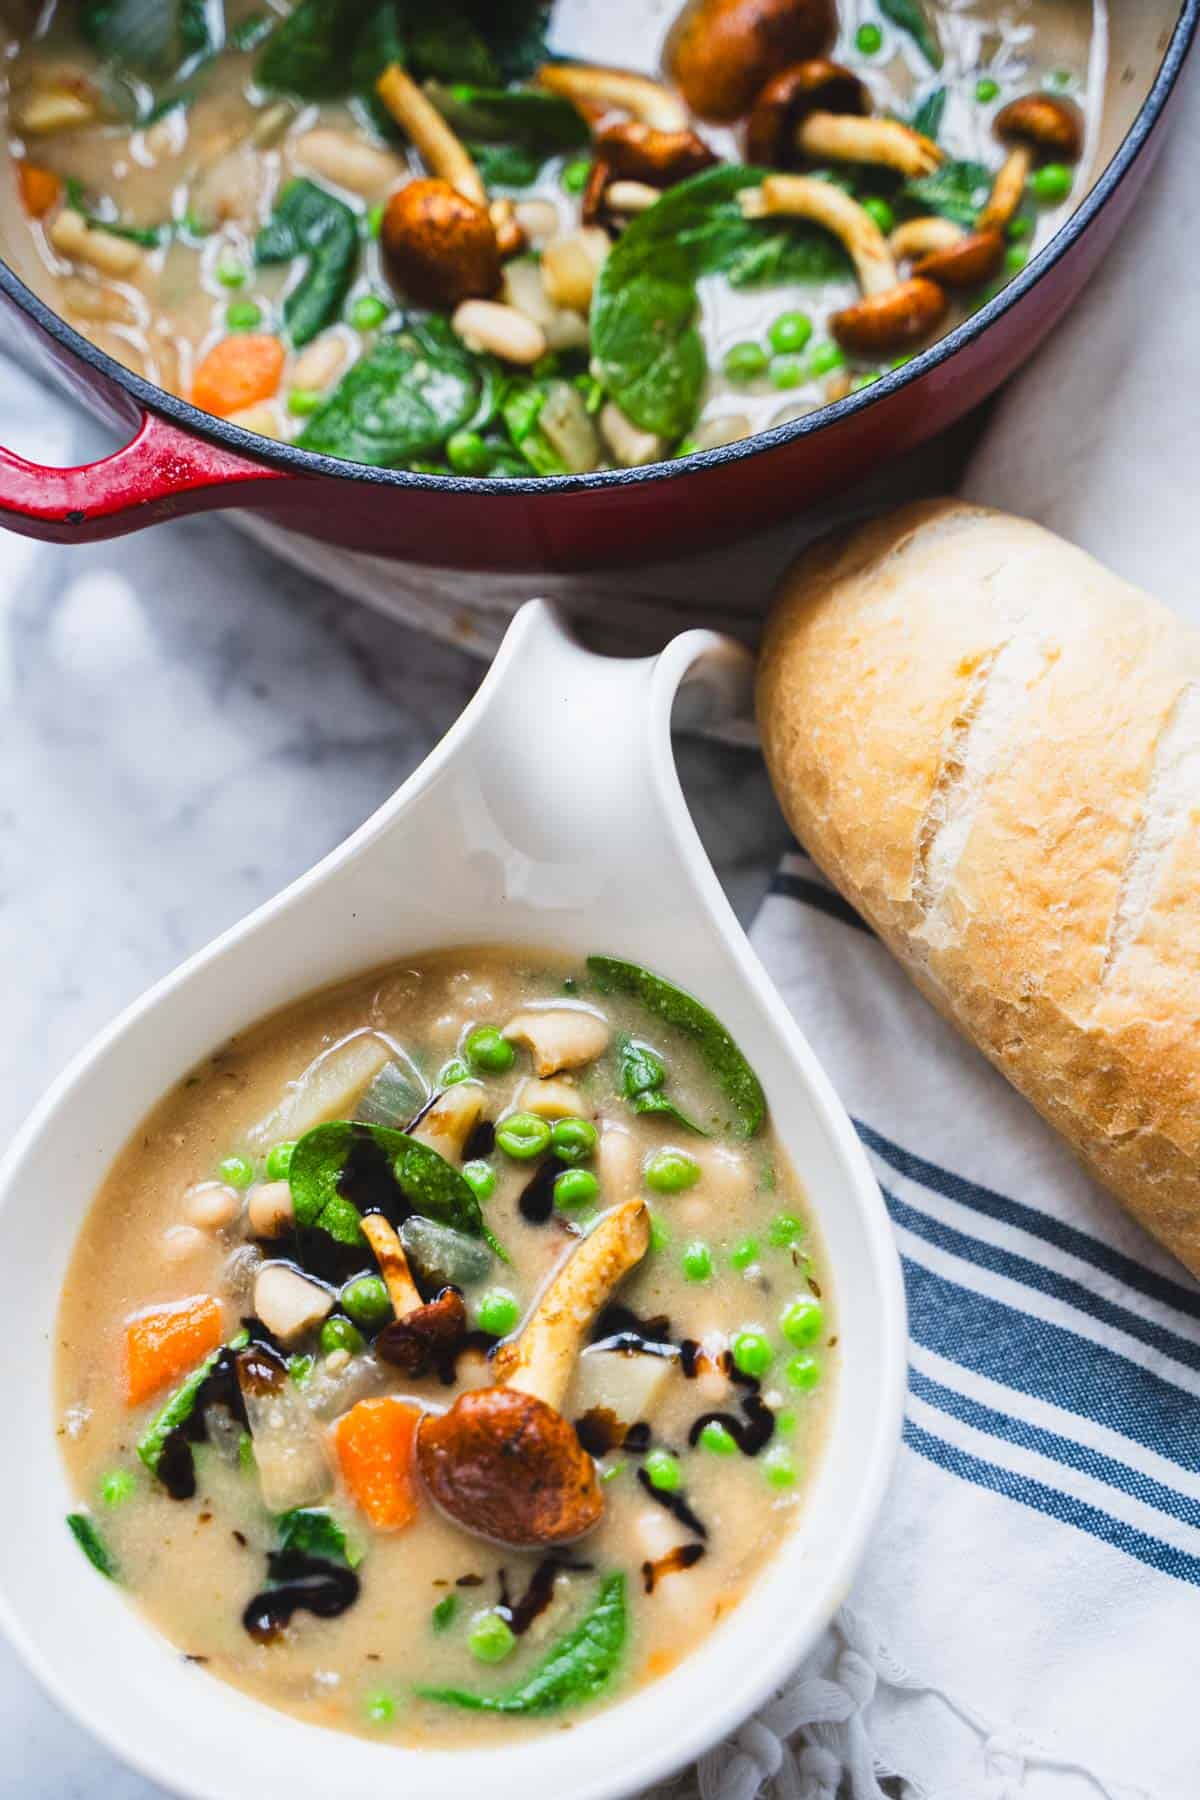 Creamy 10 vegetable and bean soup without tomatoes or cream in a white bowl on a table next to a loaf of bread.